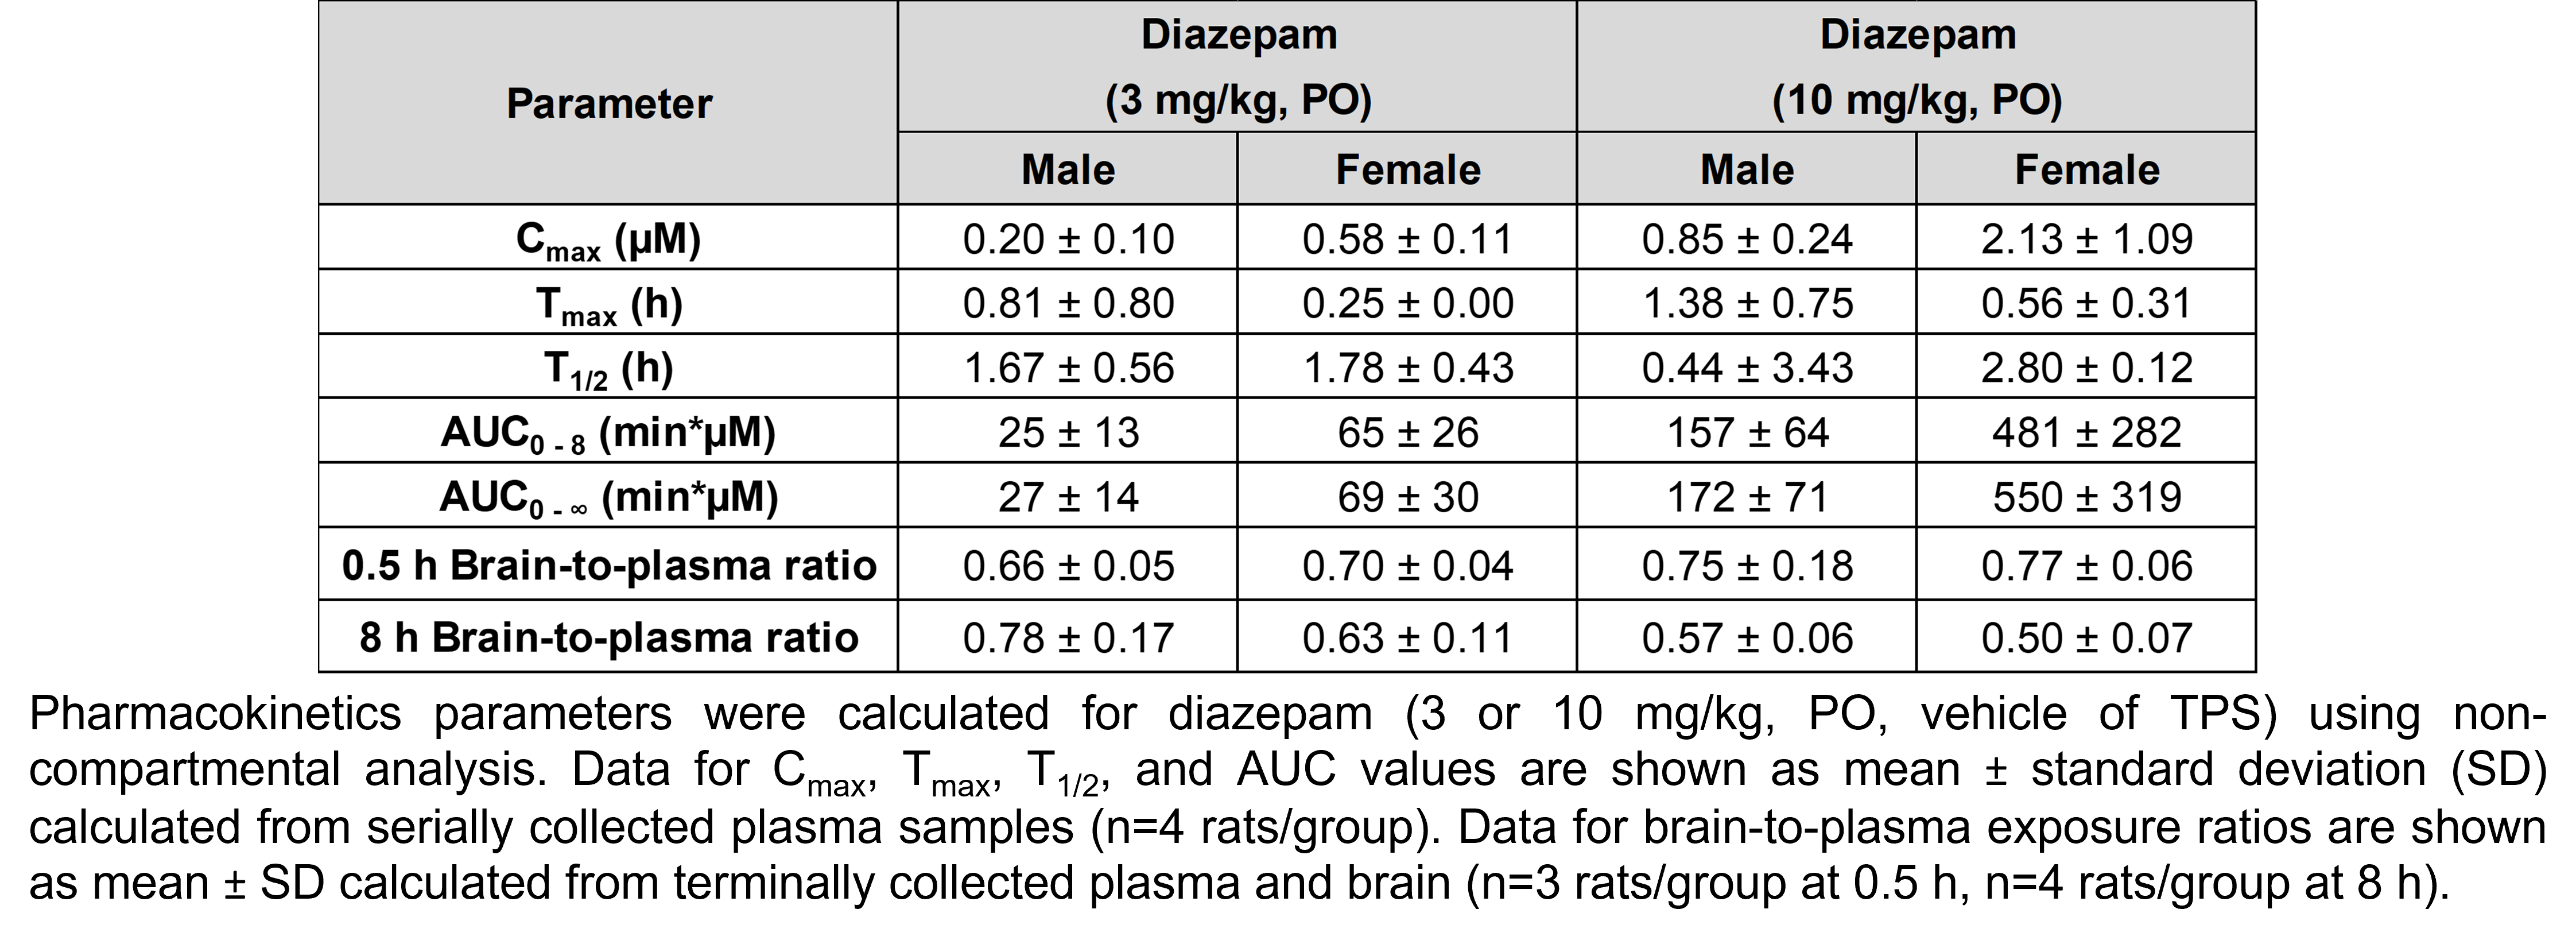 A table shows pharmacokinetics parameters calculated for diazepam using non-compartmental analysis in male and female rats treated with diazepam (3 or 10 mg/kg, PO, vehicle of TPS). The means for the 4 groups (males and females treated with 3 mg/kg diazepam and males and females treated with 10 mg/kg diazepam, respectively) are as follows. The highest concentration (Cmax) was 0.2, 0.58, 0.85, and 2.13 µM; the time at the maximum concentration (Tmax) was 0.81, 0.25, 1.38, and 0.56 hours; the half-life (T1/2) was 1.67, 1.78, 0.44, and 2.8 hours; area under the curve for time 0 to 8 hours was 25, 65, 157, and 481 minutes*µM; area under the curve for time 0 to infinity was 27, 69, 172, and 550 minutes*µM; the brain-to-plasma ratio at 0.5 hour was 0.66, 0.7, 0.75, and 0.77; the brain-to-plasma ratio at 8 hours was 0.78, 0.63, 0.57, and 0.5.